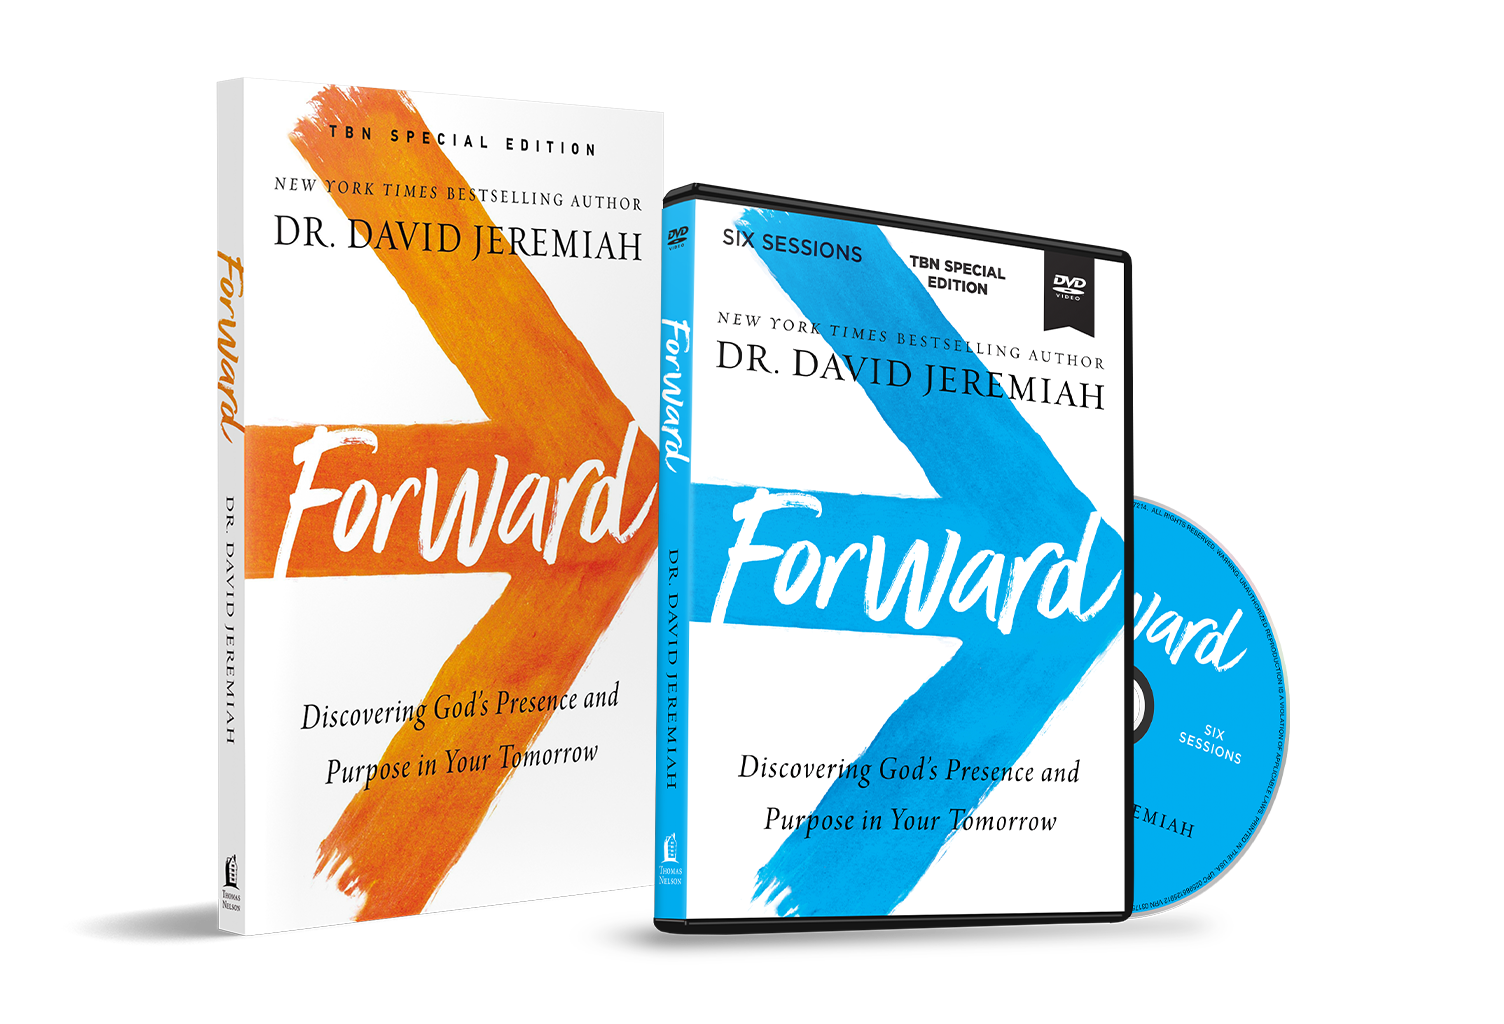 Dr. Jeremiah’s Forward DVD teaching series and study guide set on TBN